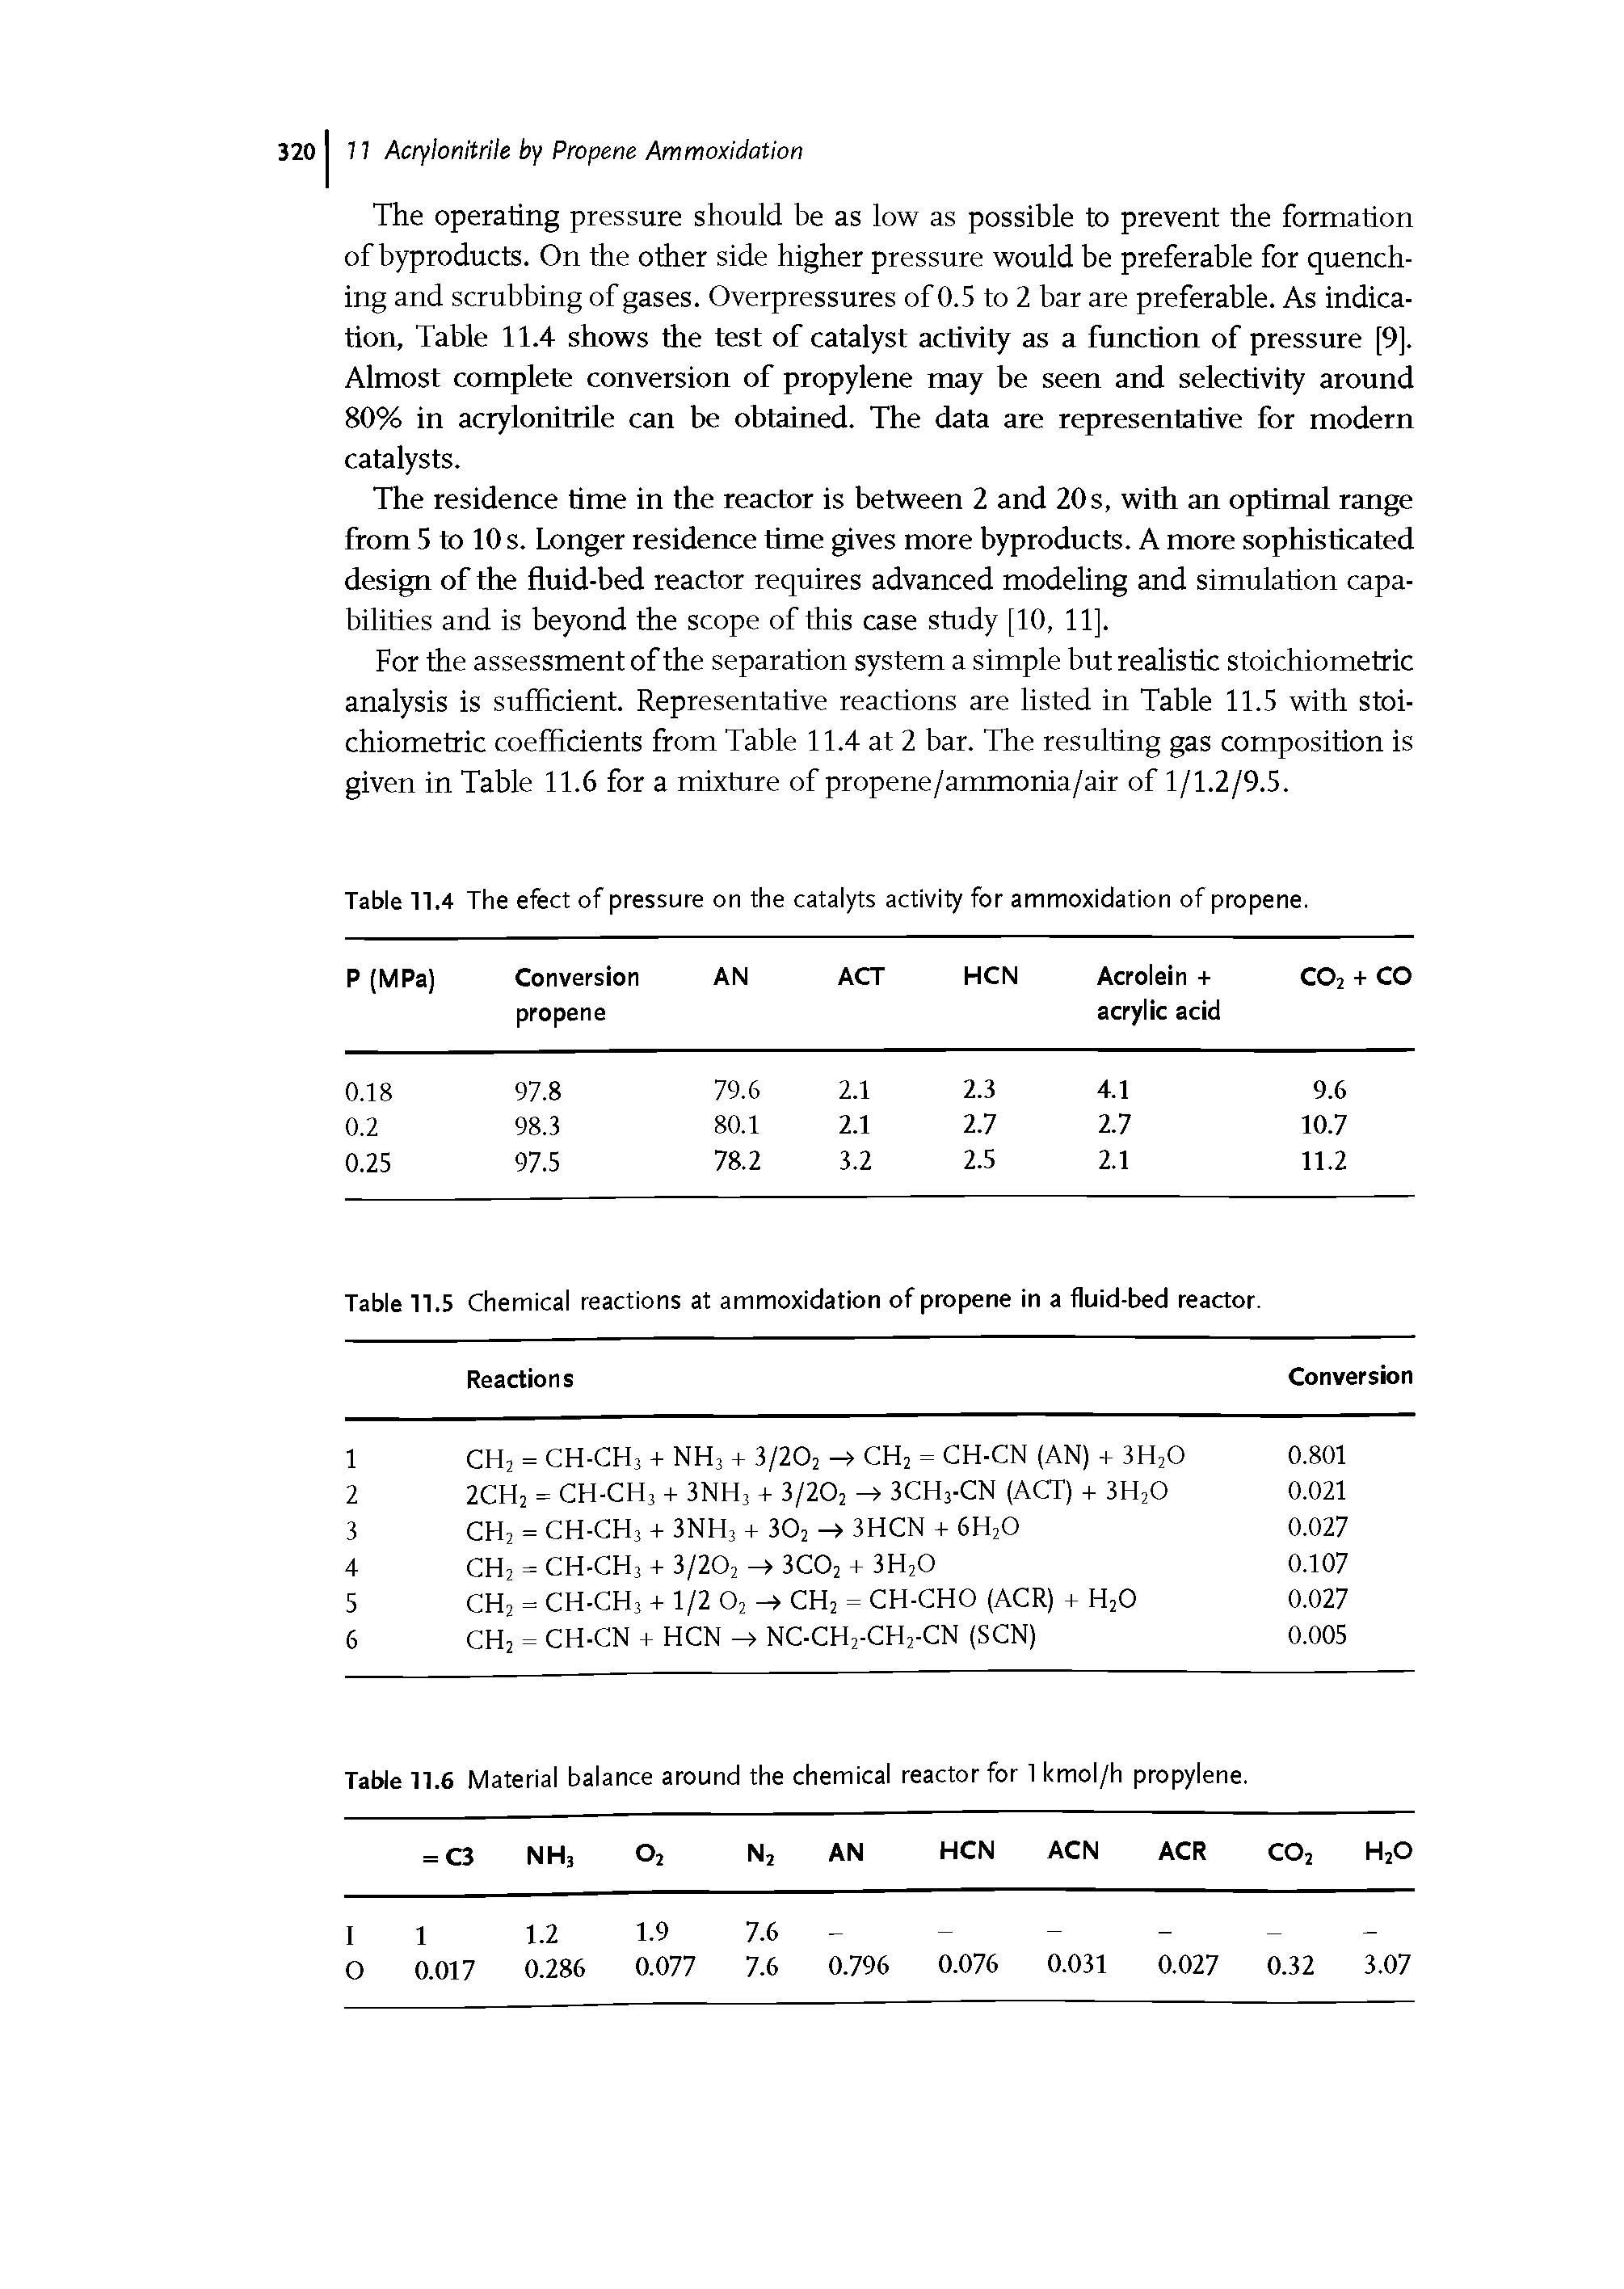 Table 11.5 Chemical reactions at ammoxidation of propene in a fluid-bed reactor.